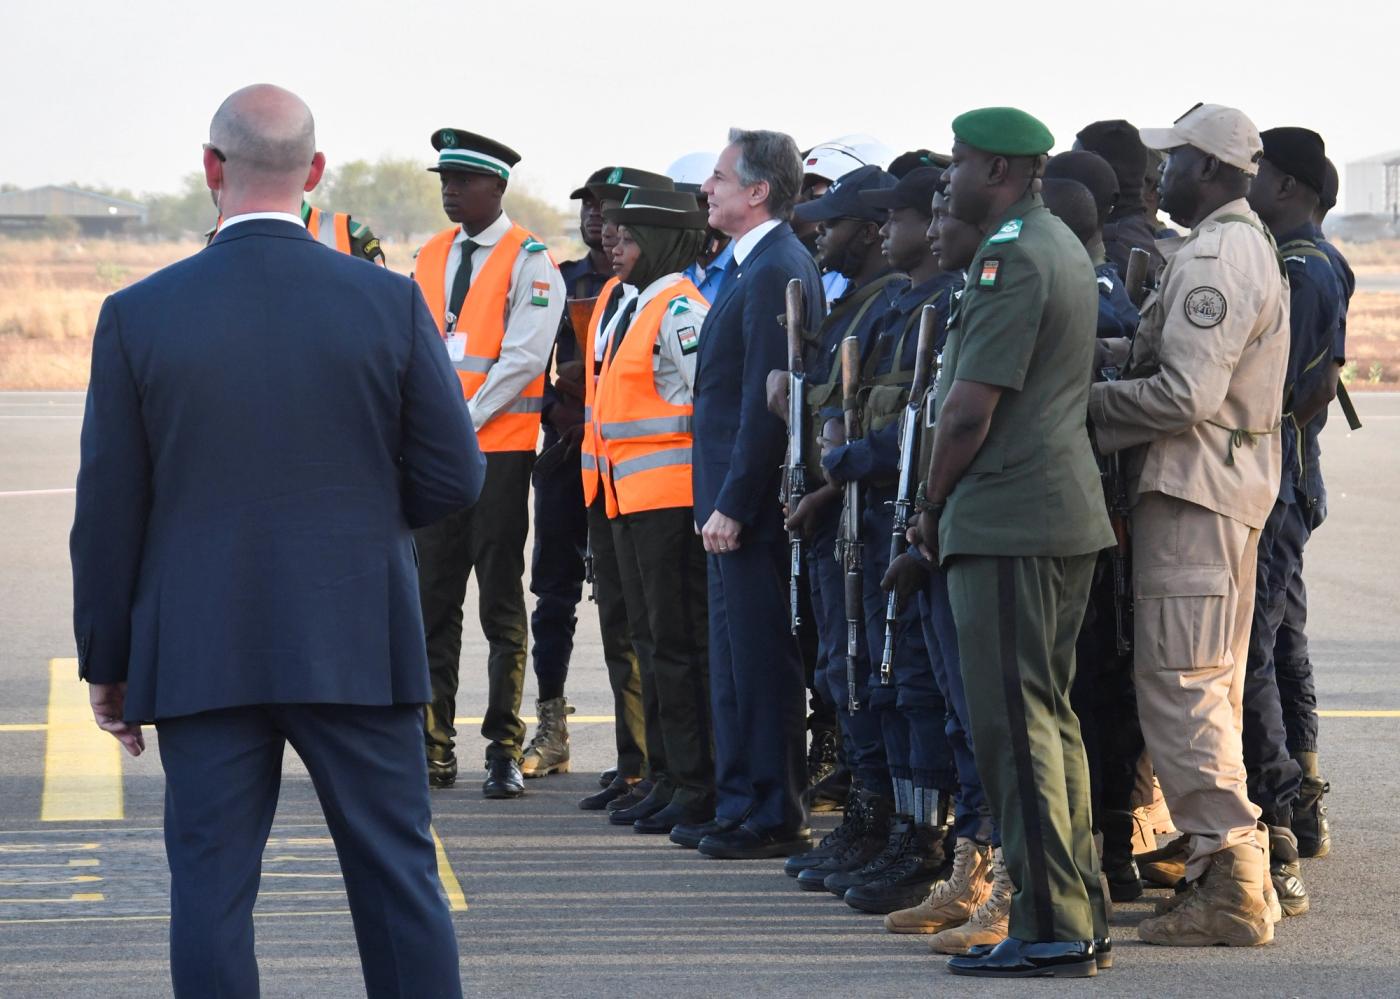 US Secretary of State Antony Blinken poses for a photograph with members of the Niger Defence and Security Forces before departing Niger on Friday.